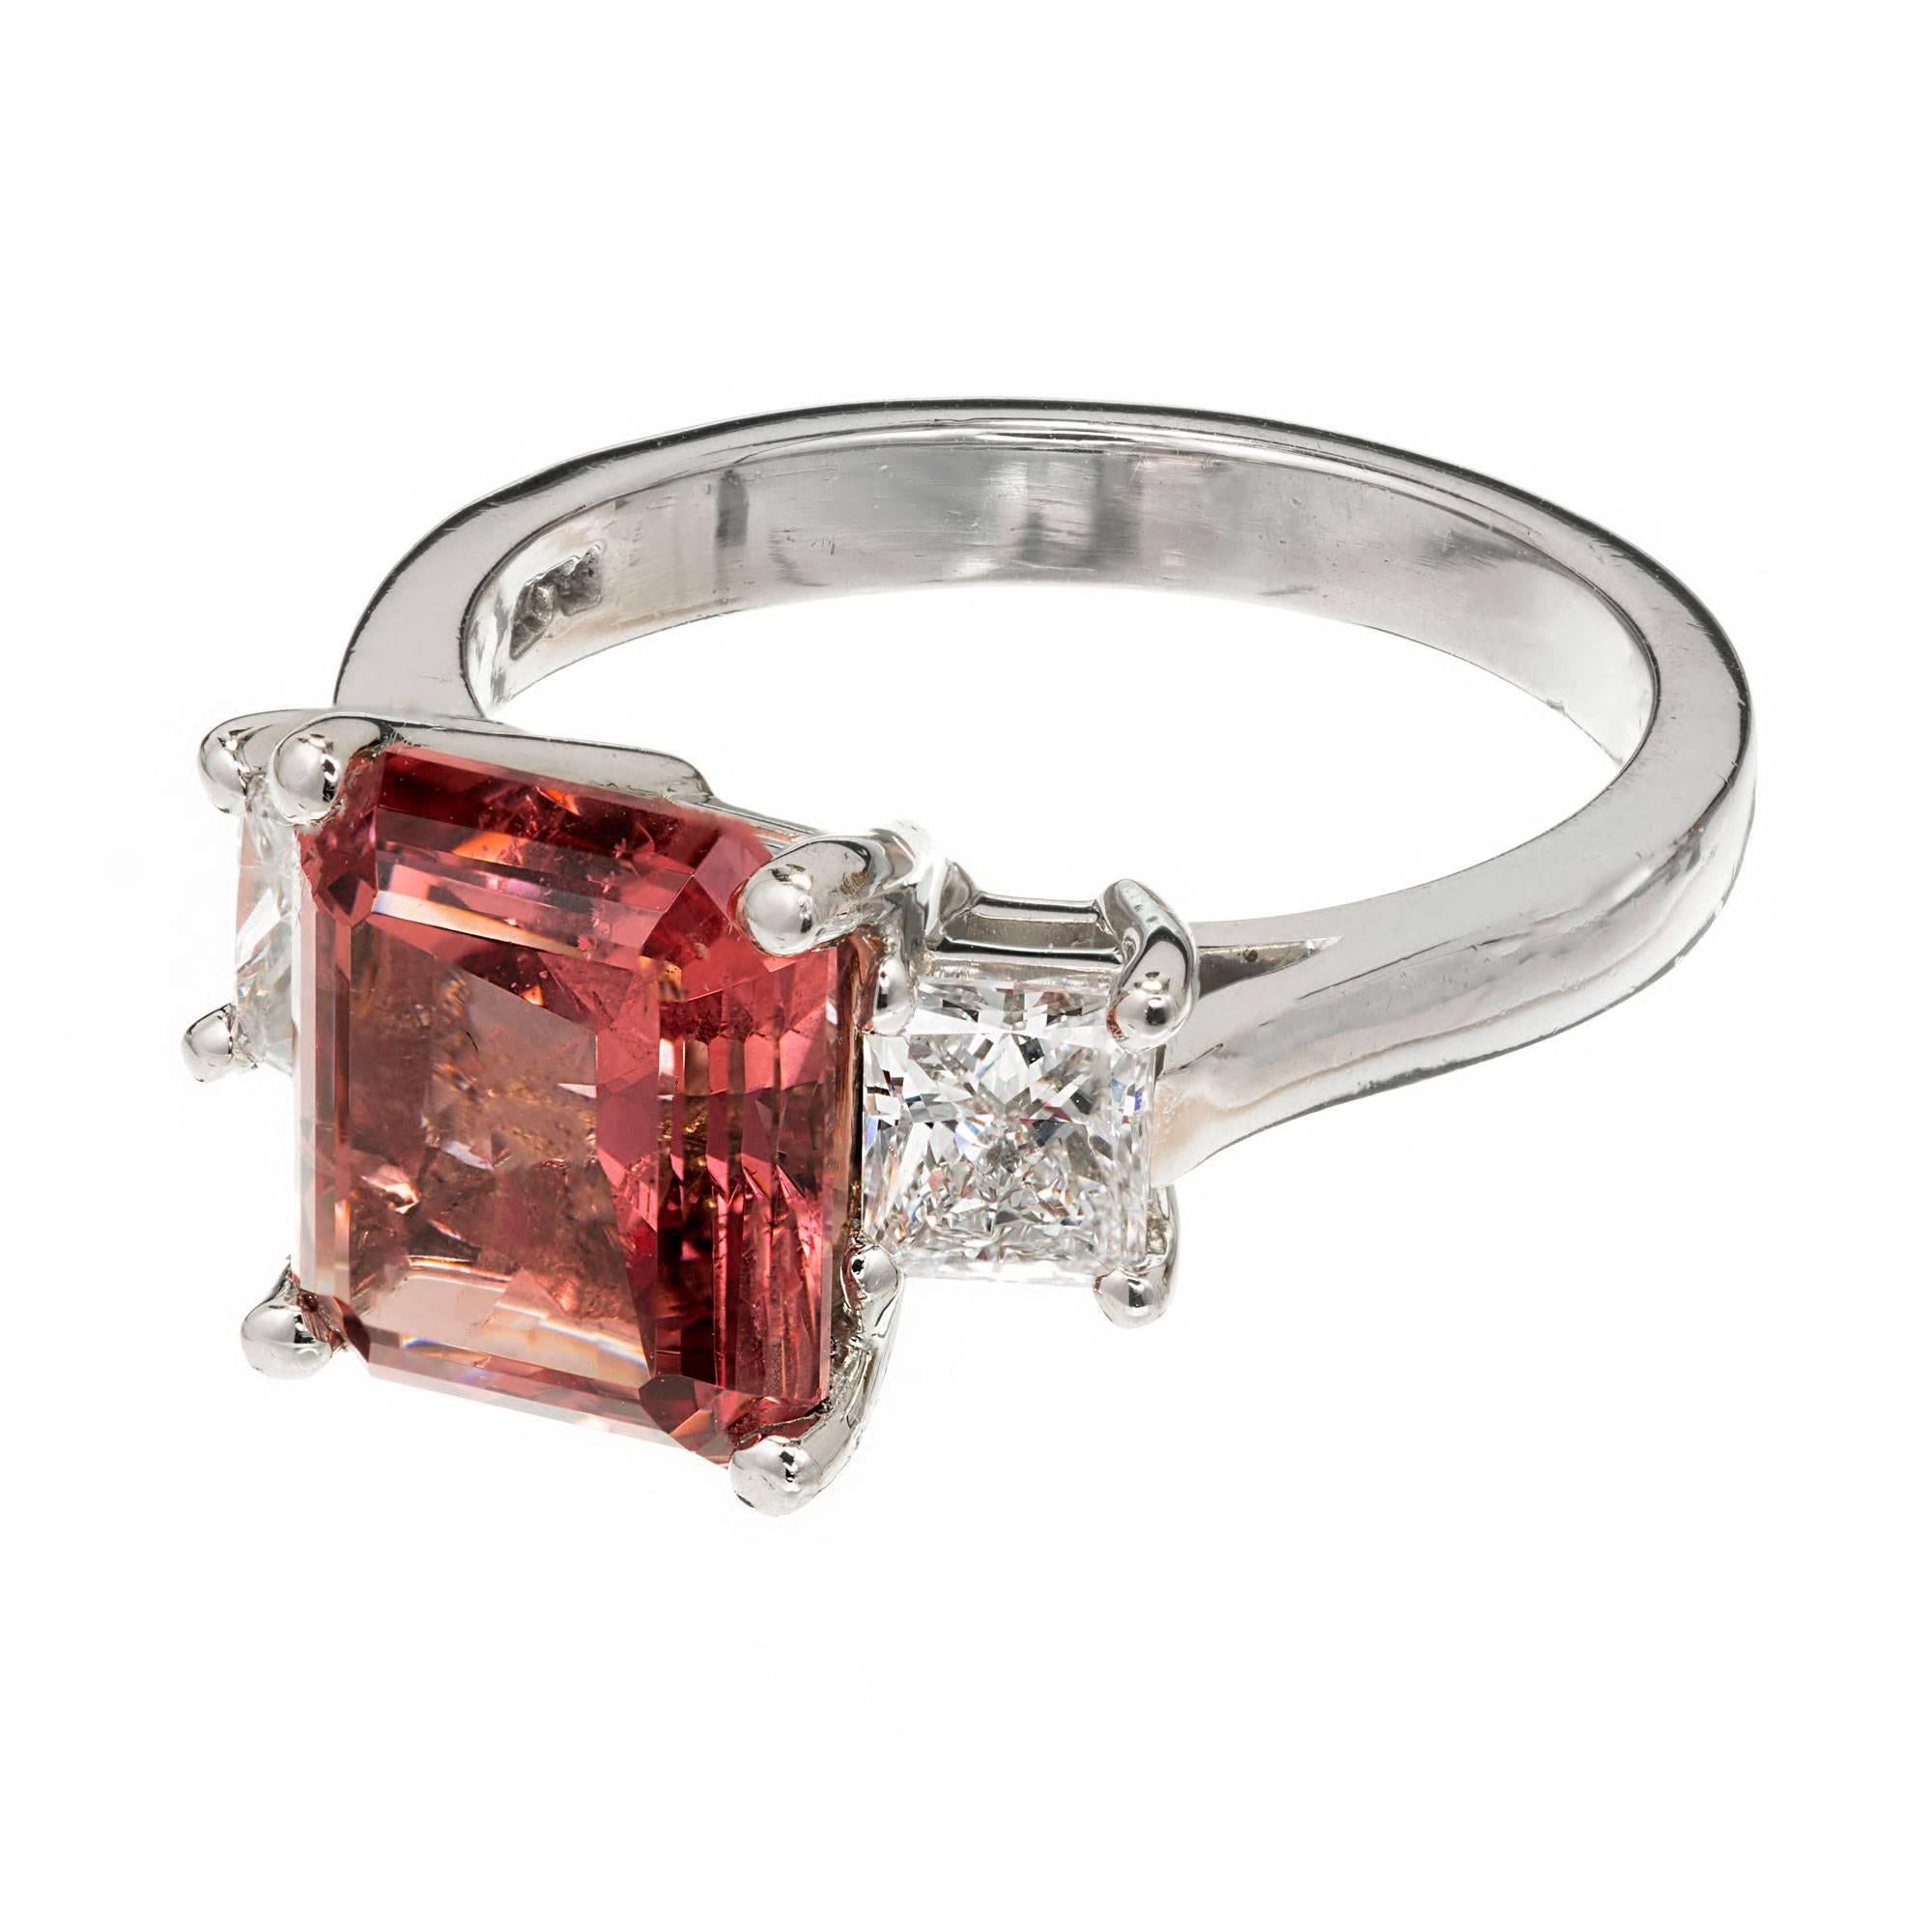 Very rare very special certified natural totally untreated color change Garnet 3.92ct modified Emerald cut. Stone circa 1930 to 1940, Natural inclusions, SI3 to I1. Classic three stone Platinum diamond setting.

1 Very bright and very rare all